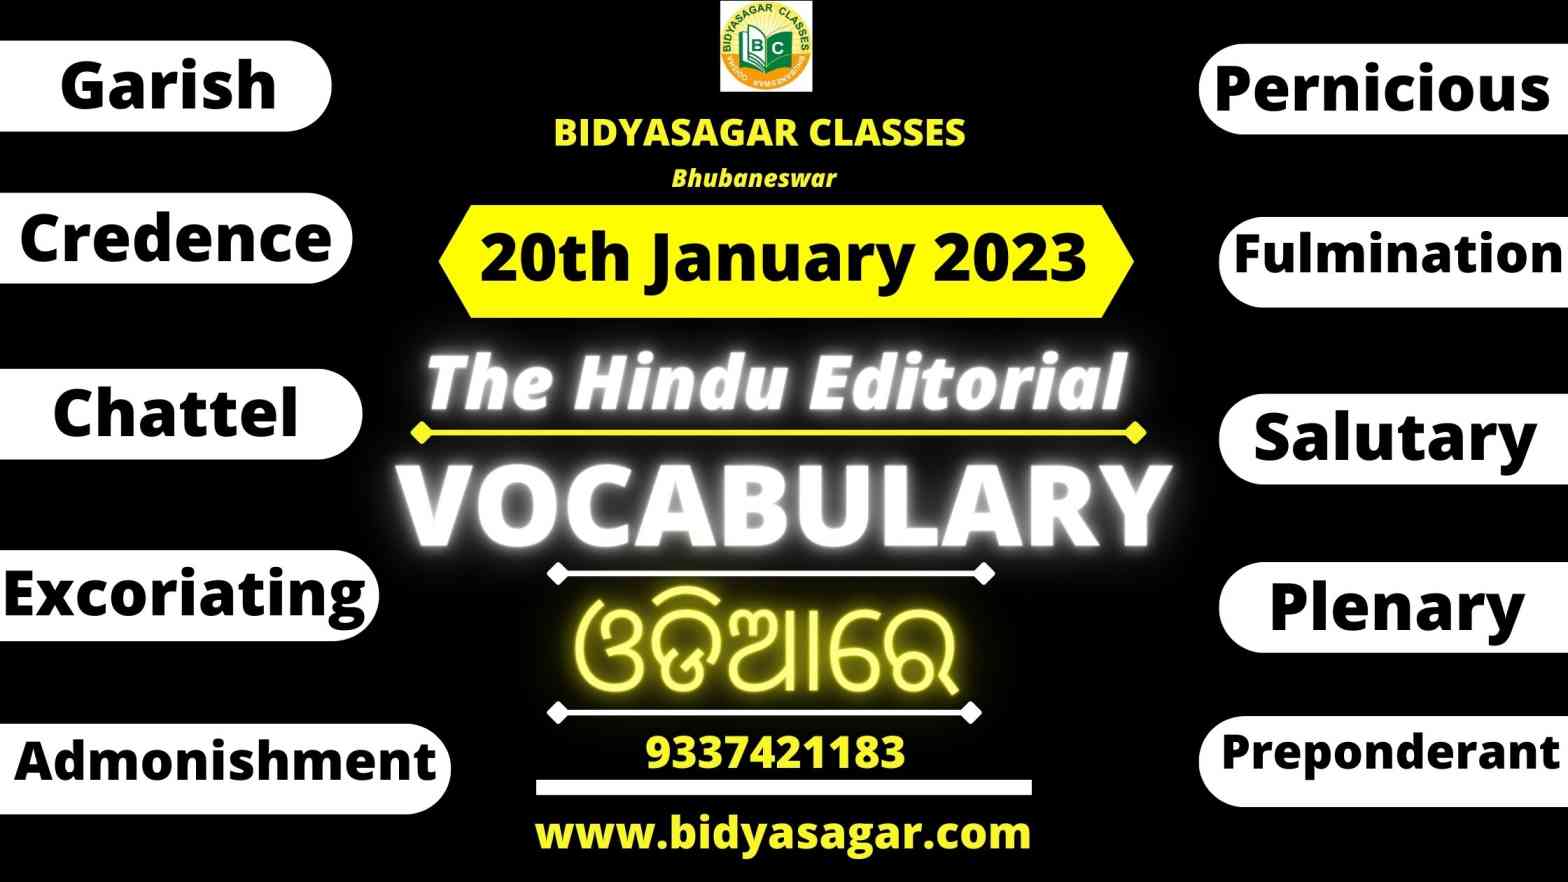 The Hindu Editorial Vocabulary of 20th January 2023